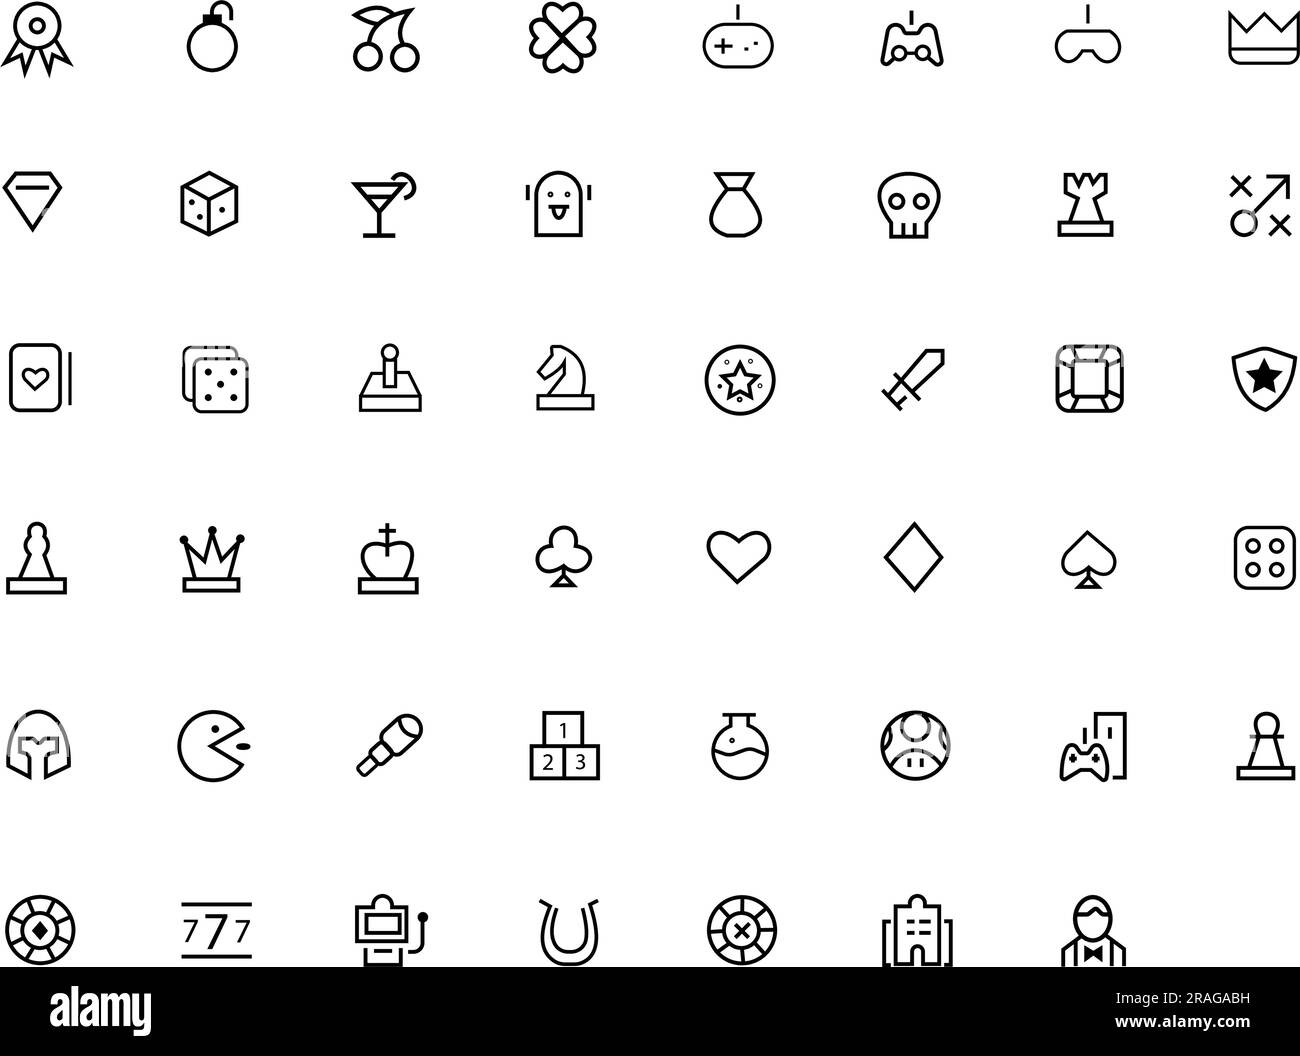 Games icon set. Game types and features. Linear design. Editable stroked lines. Isolated vector icons Stock Vector